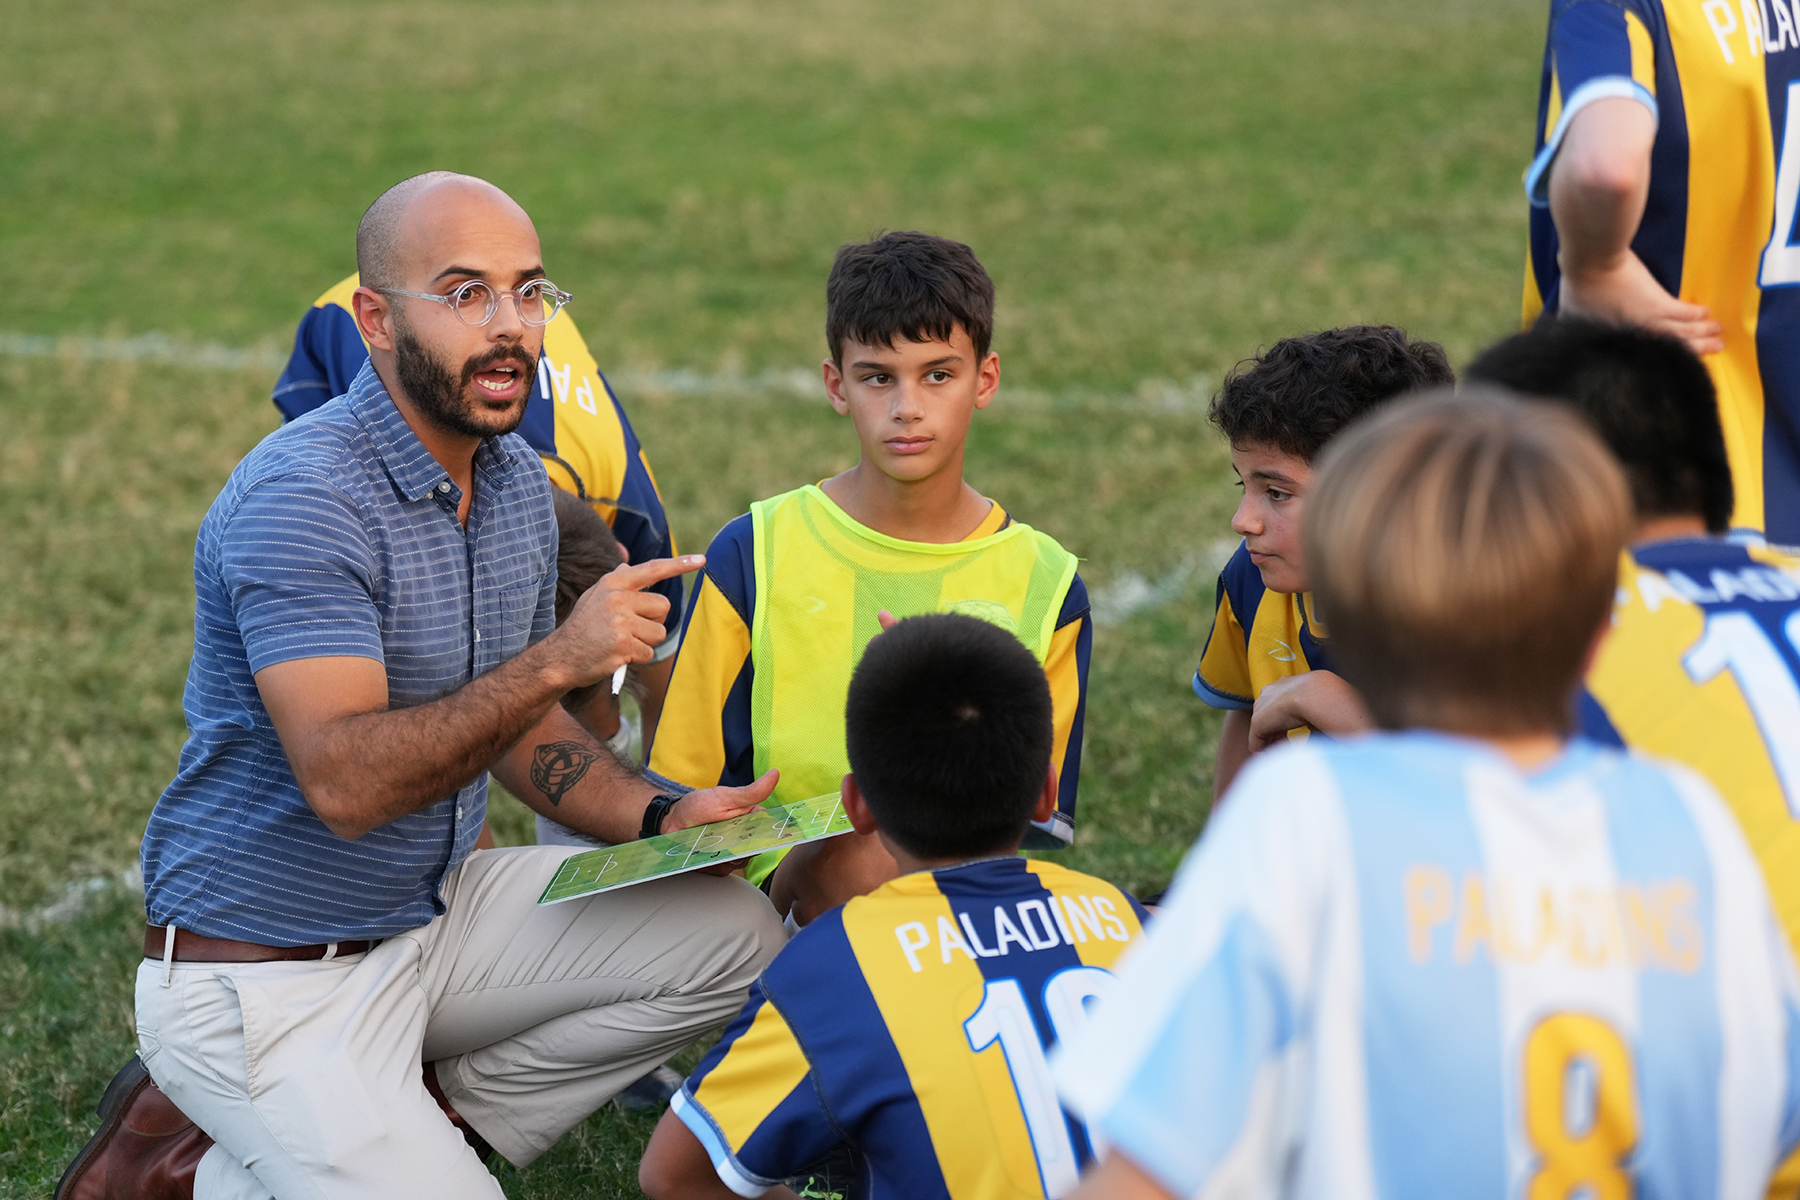 Providence Classical School Soccer coach speaking to players